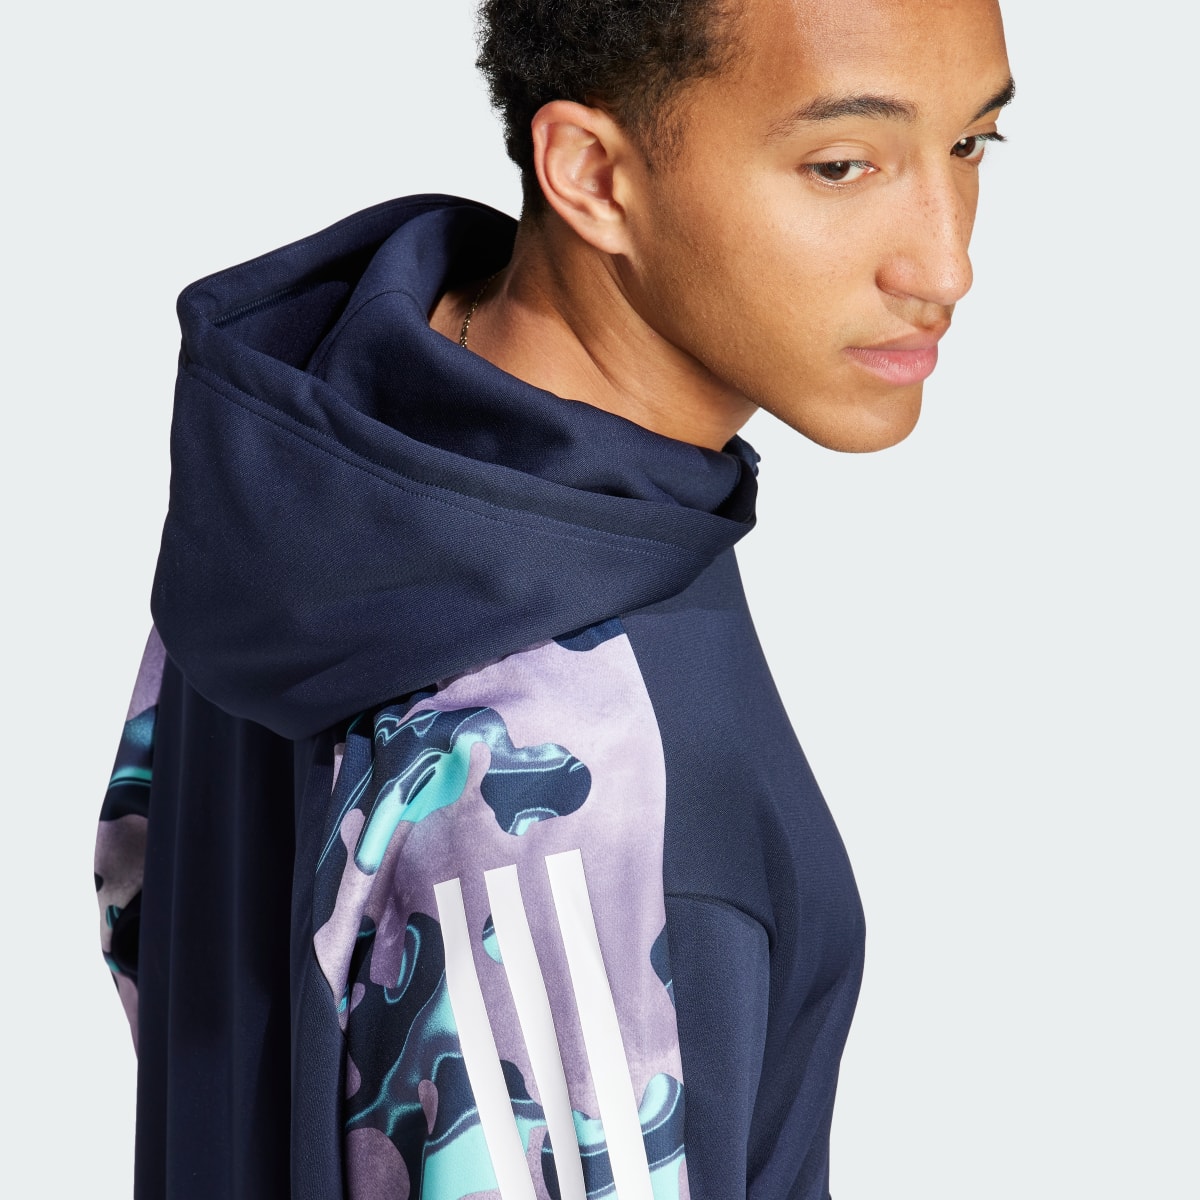 Adidas Future Icons Allover Print Hoodie. 7